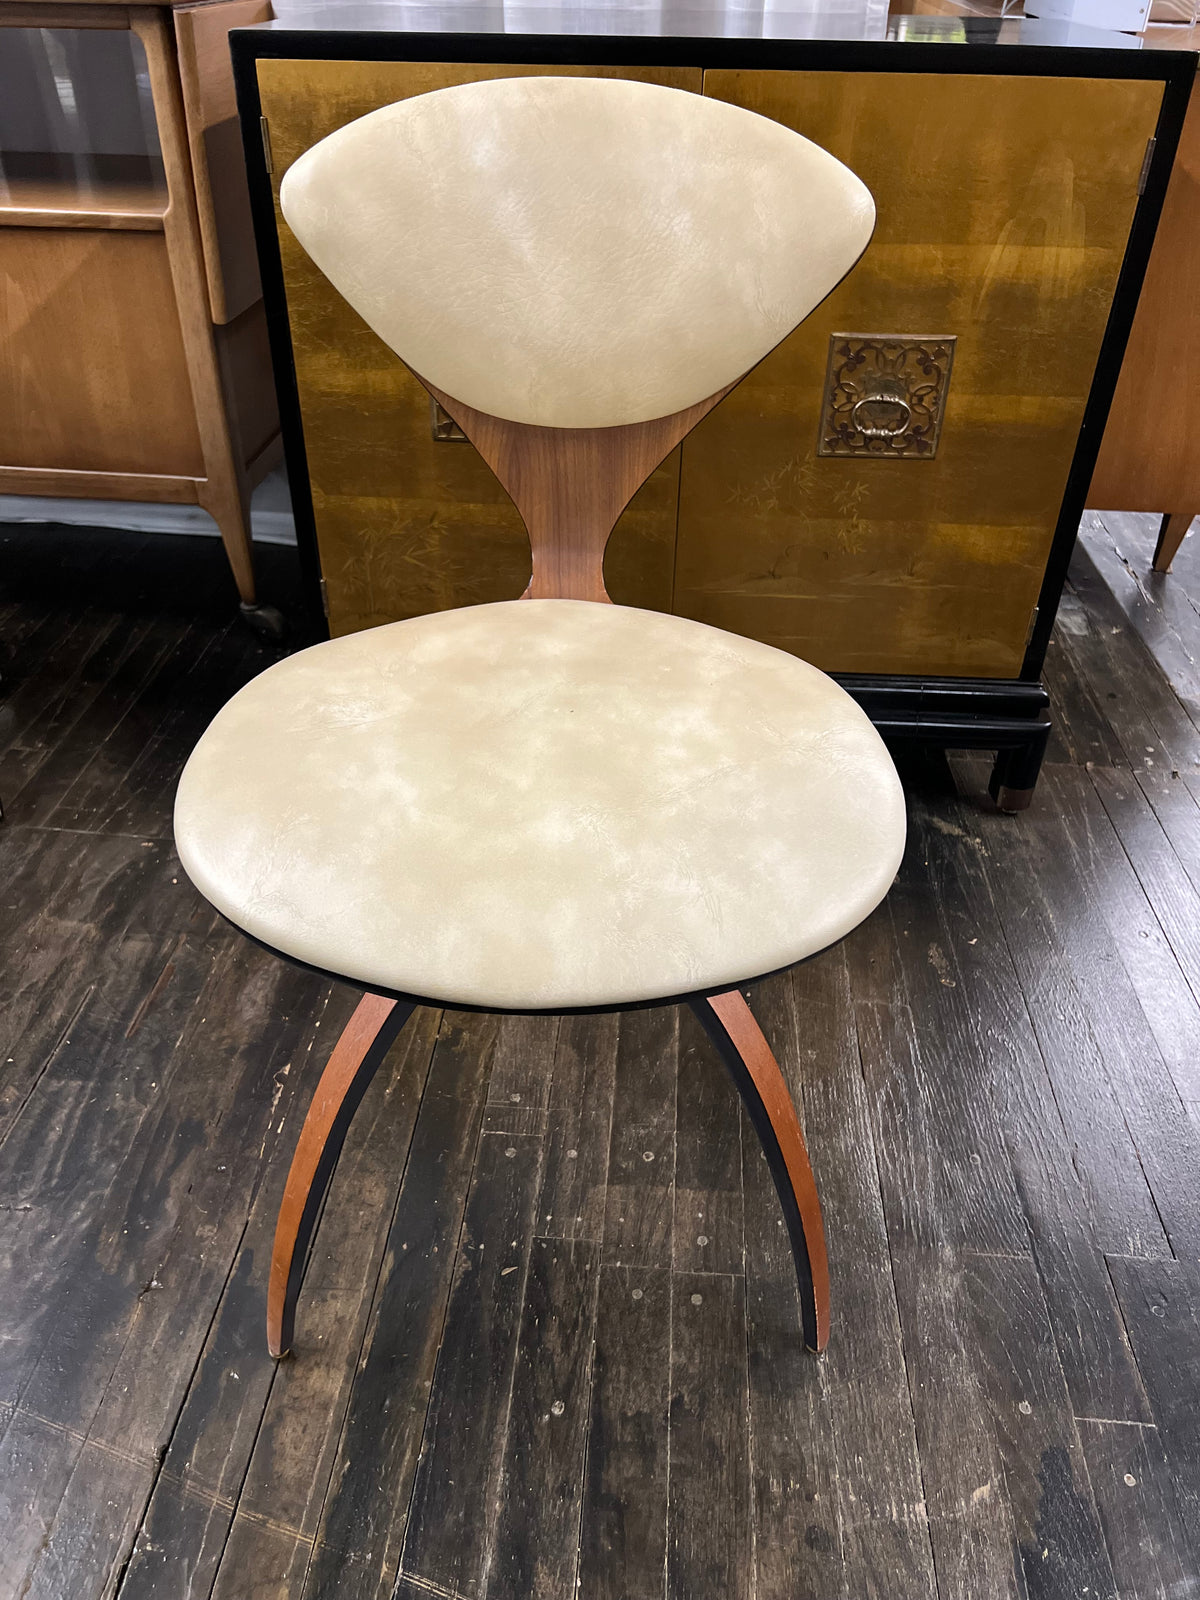 Cherner and Knoll chair rental - 1 day